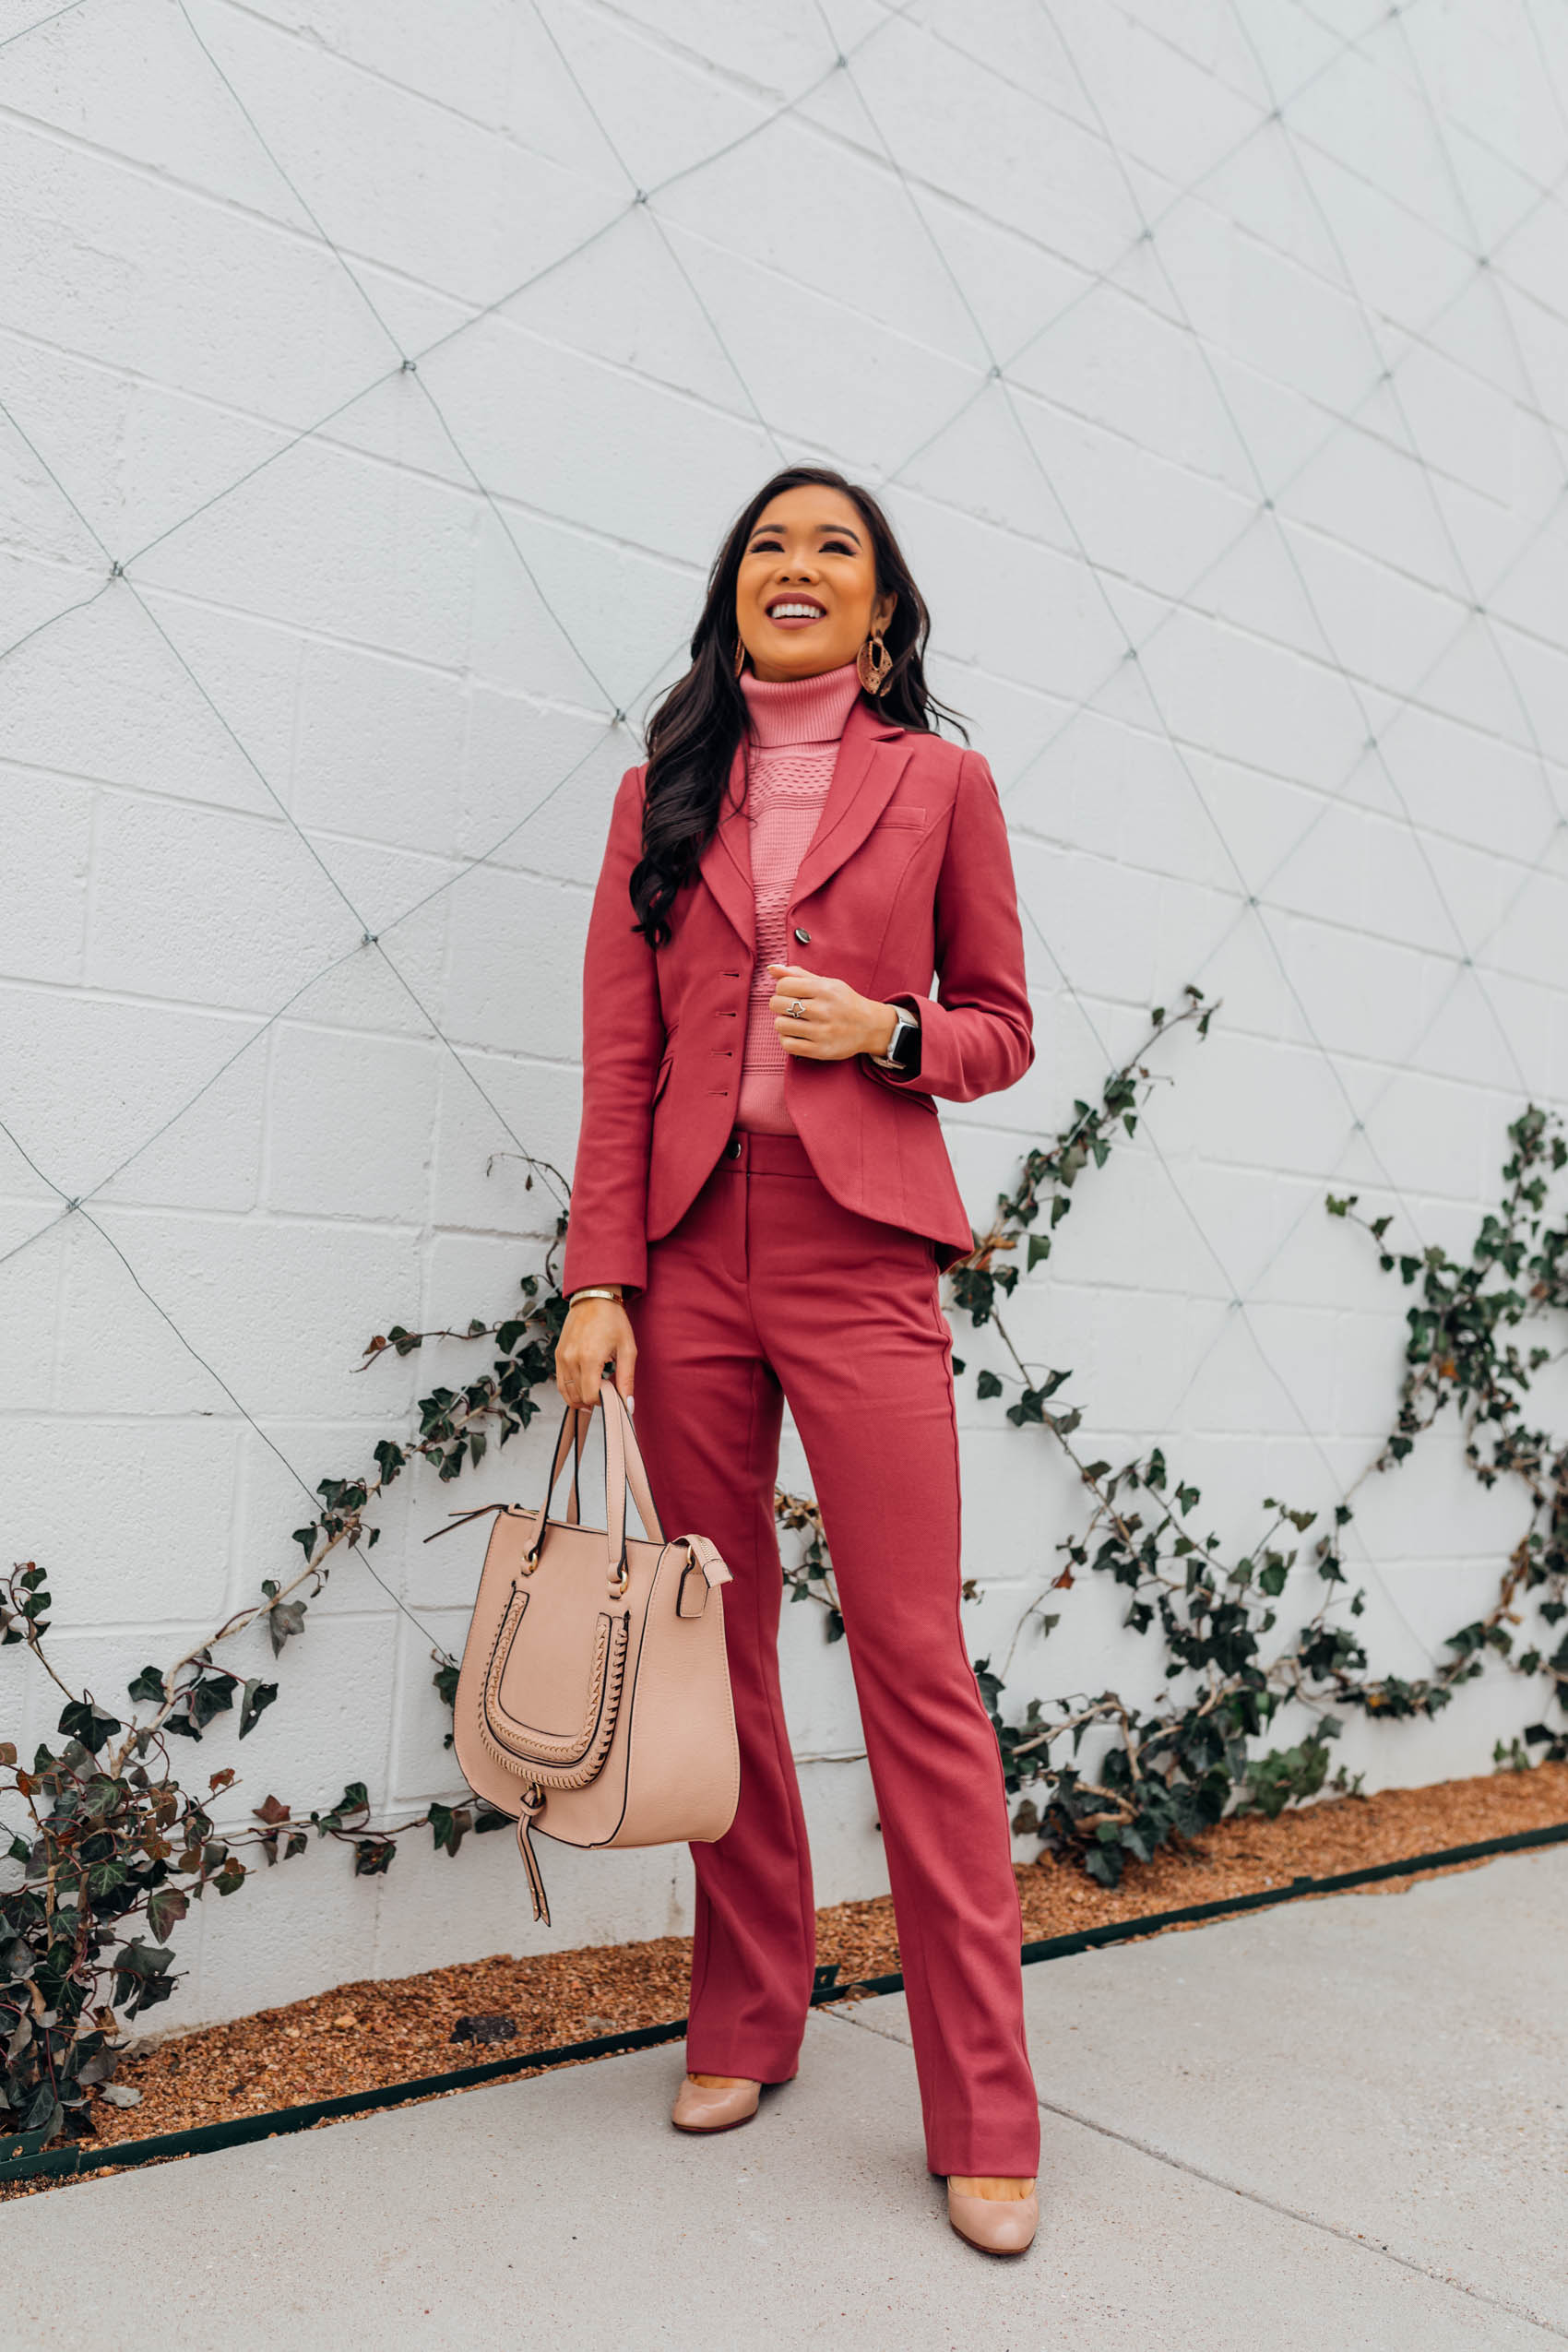 Blogger Hoang-Kim shares a colorful workwear style from White House Black Market